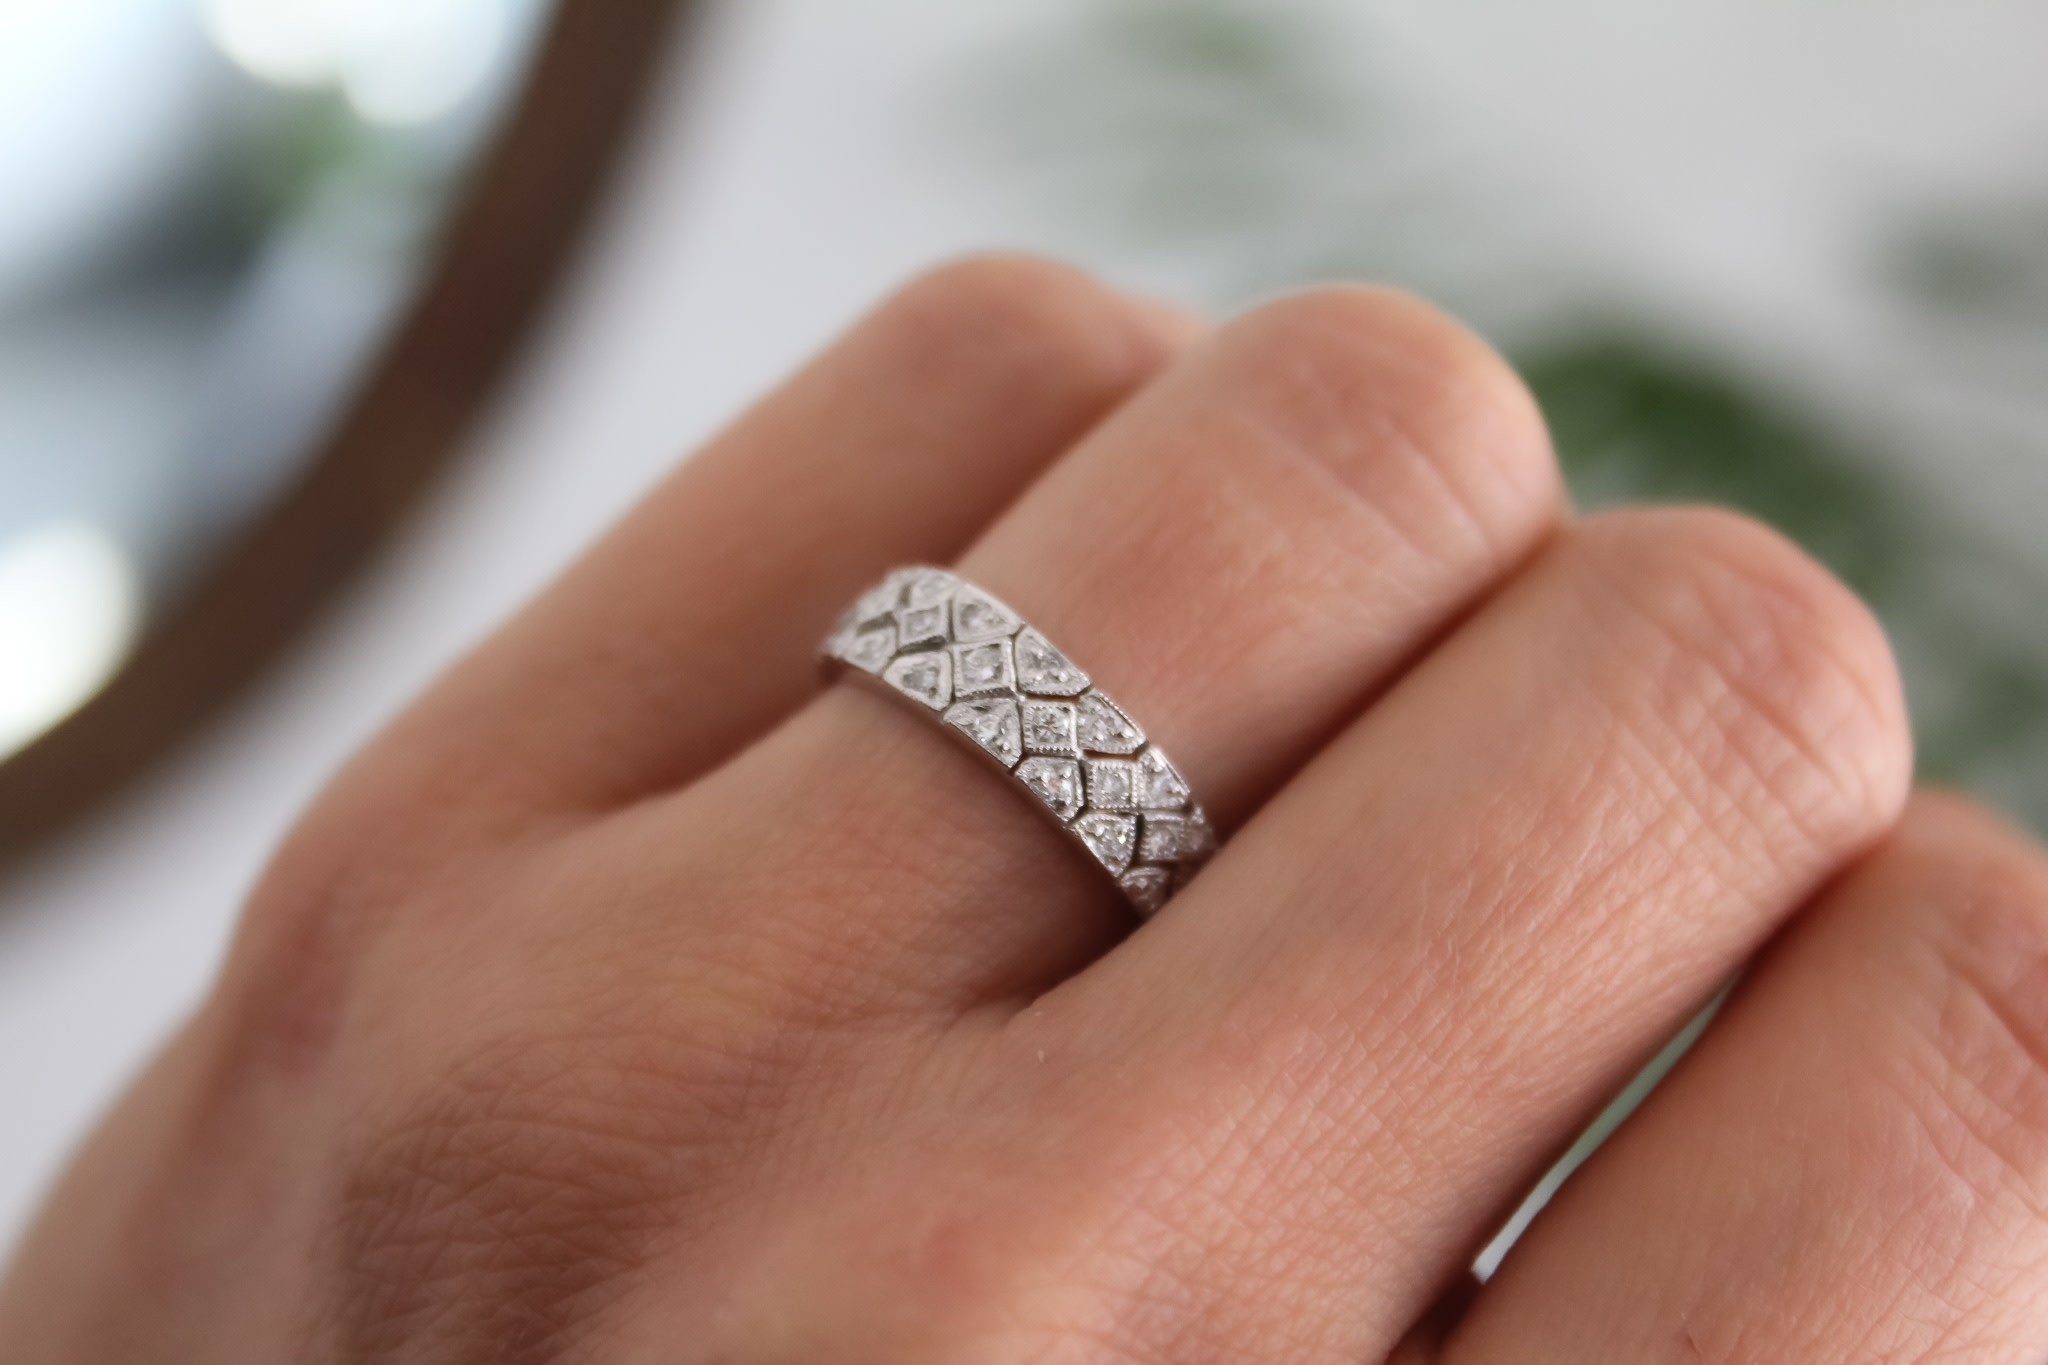 A woman's ring finger is adorned with a platinum ring set with diamond stones